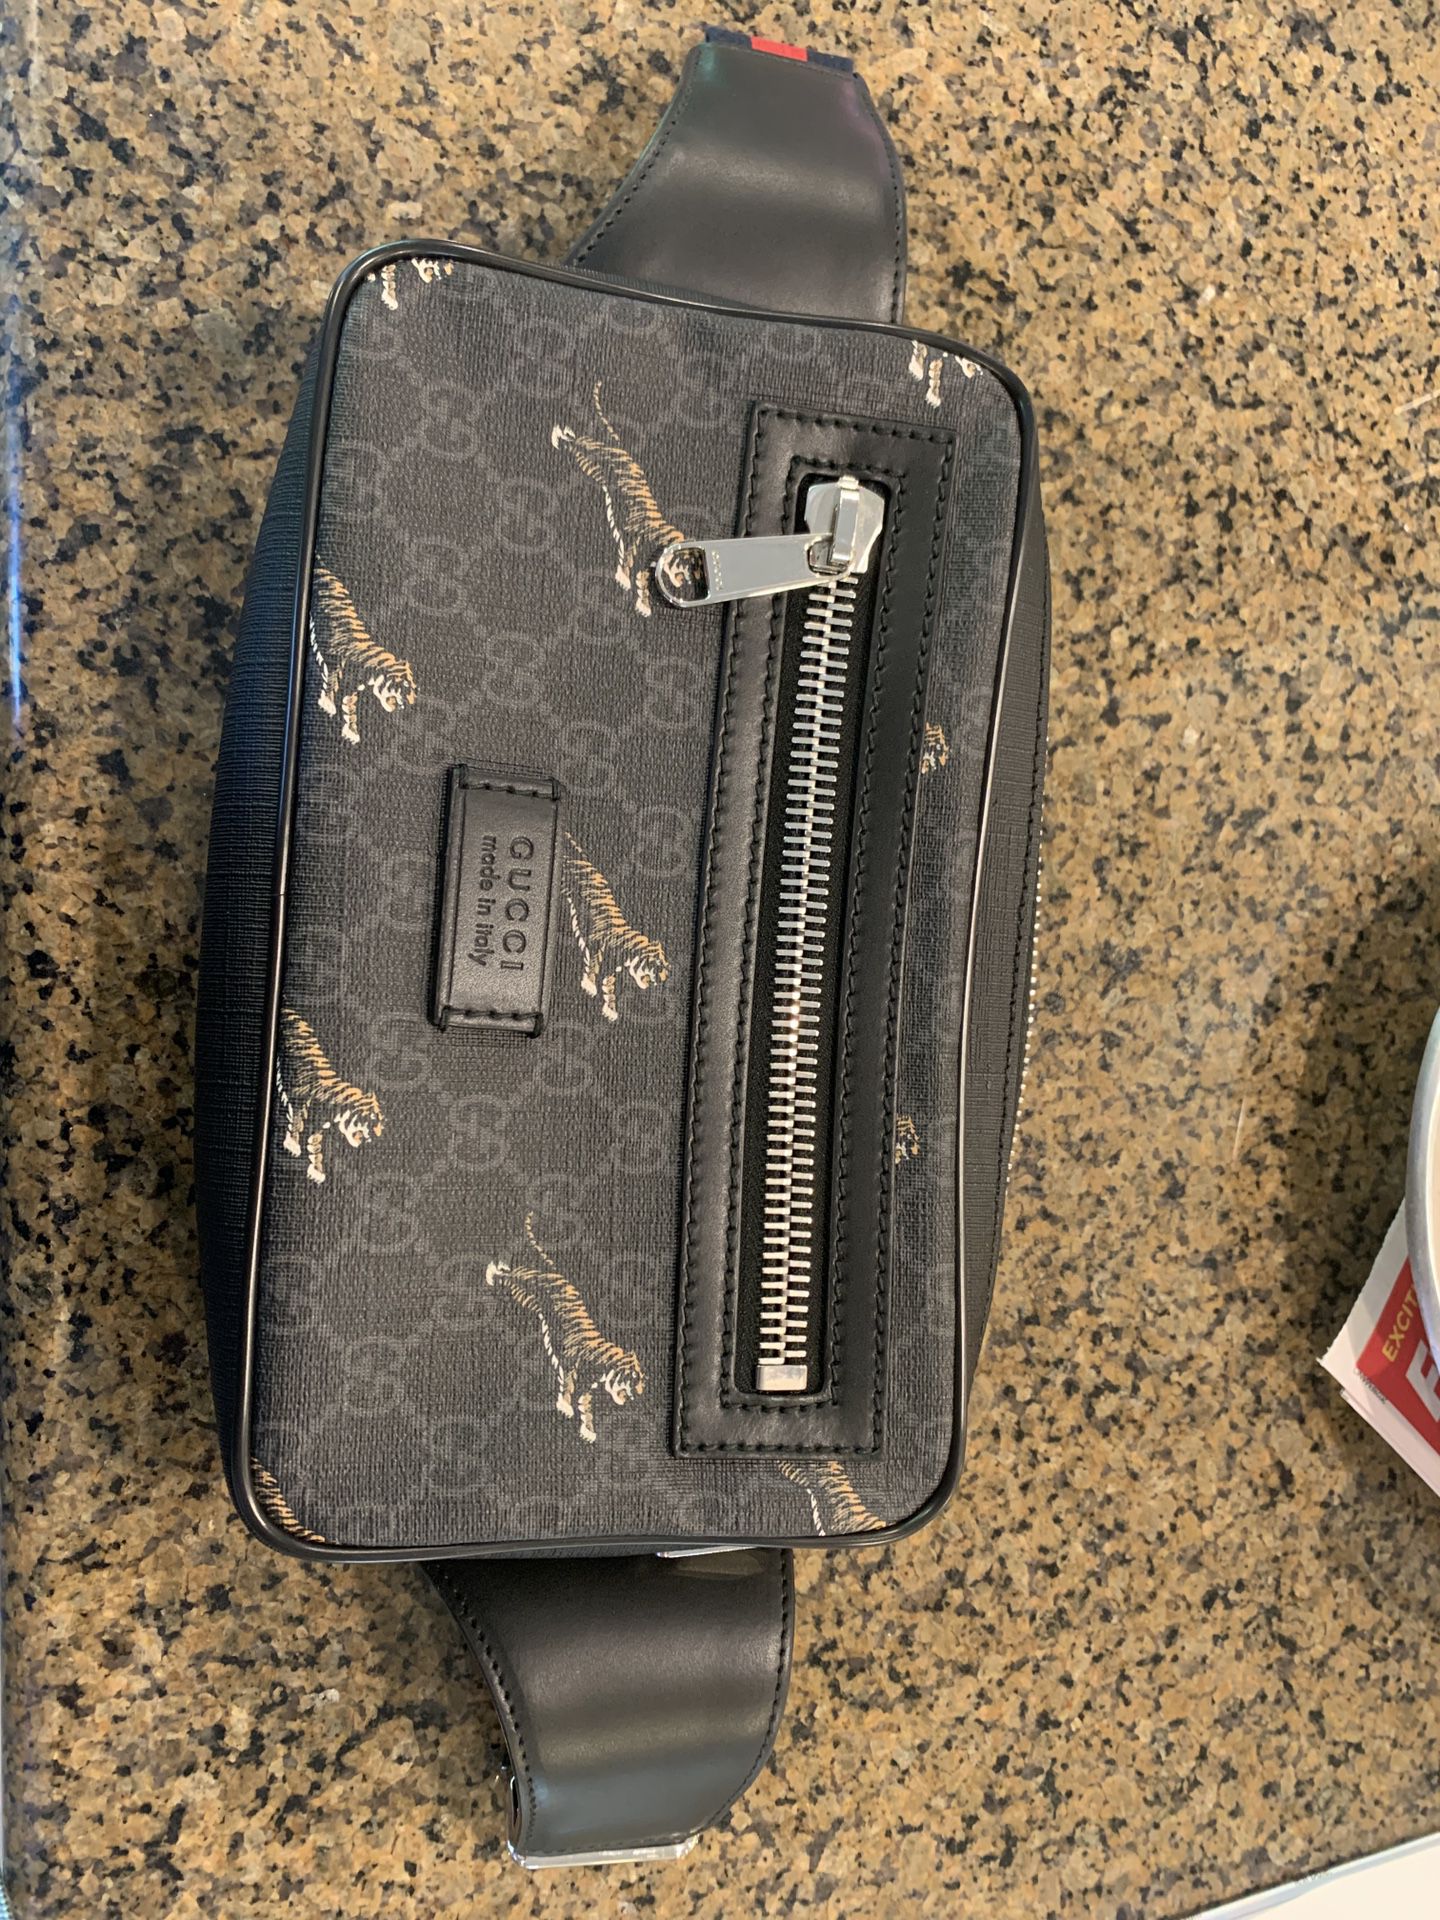 Almost brand new authentic Gucci belt bag